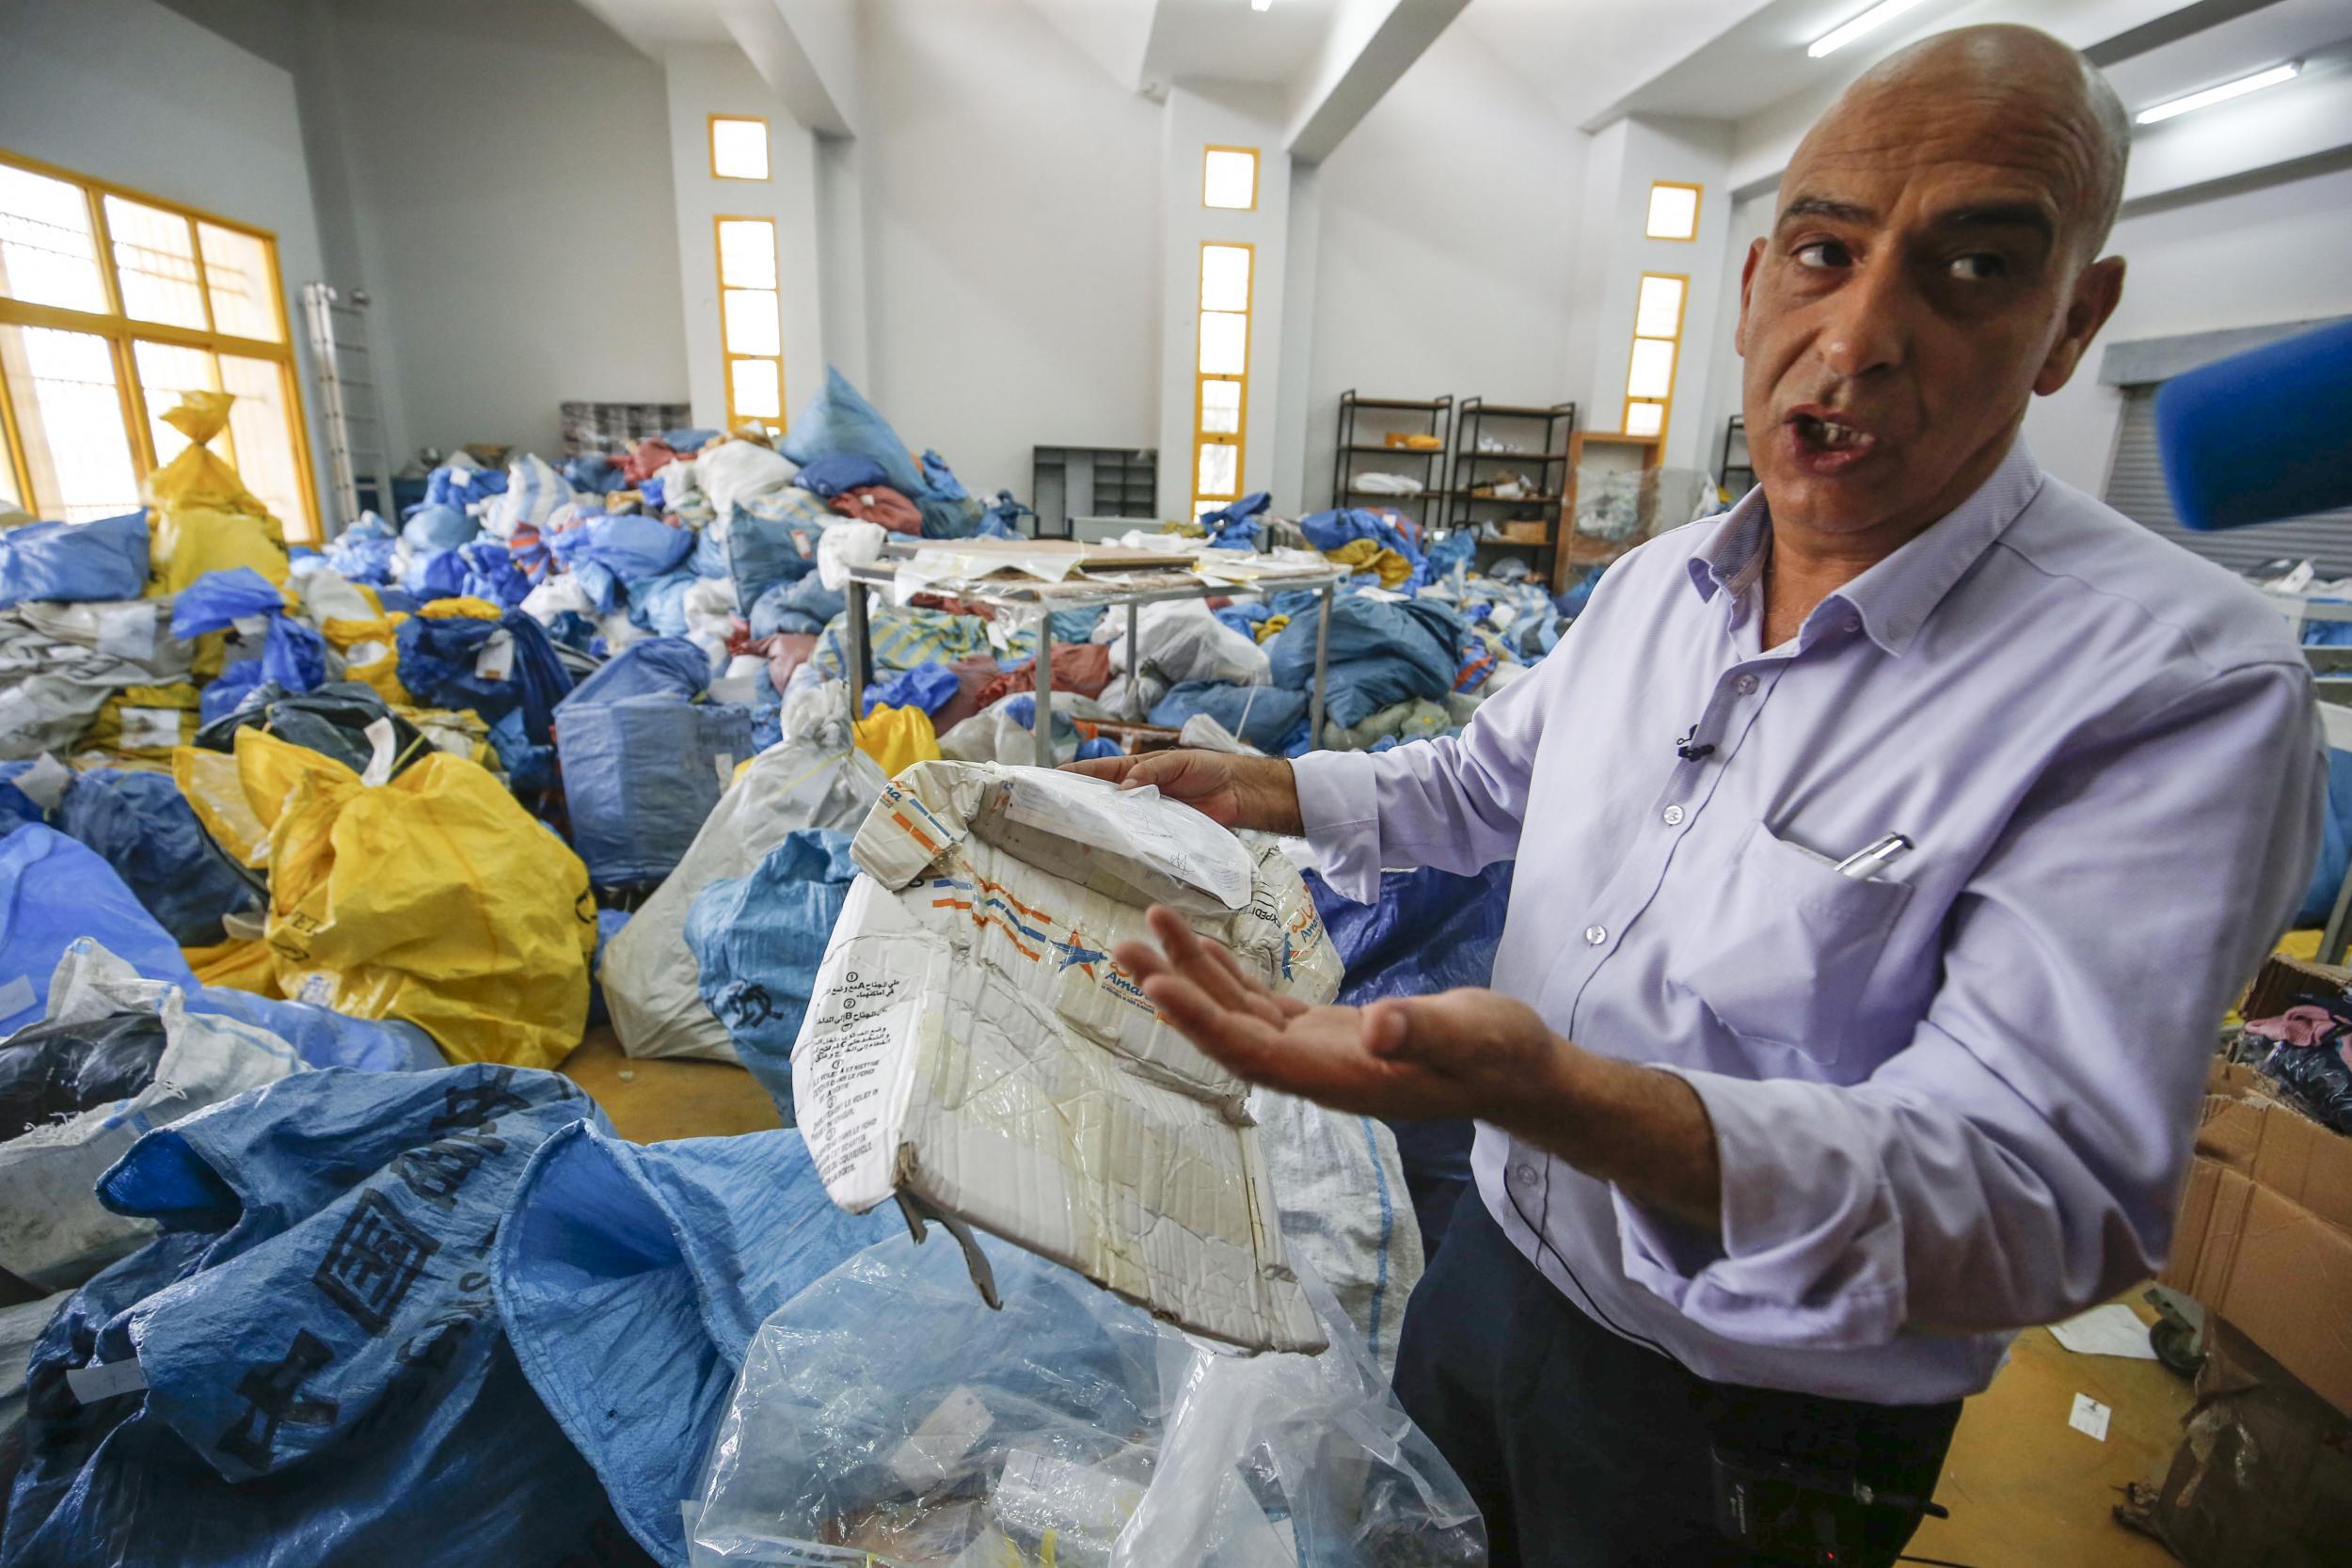 Ramadan Ghazawi, a Palestinian official at Jericho’s post office, said the parcels had been blocked on security and administrative grounds